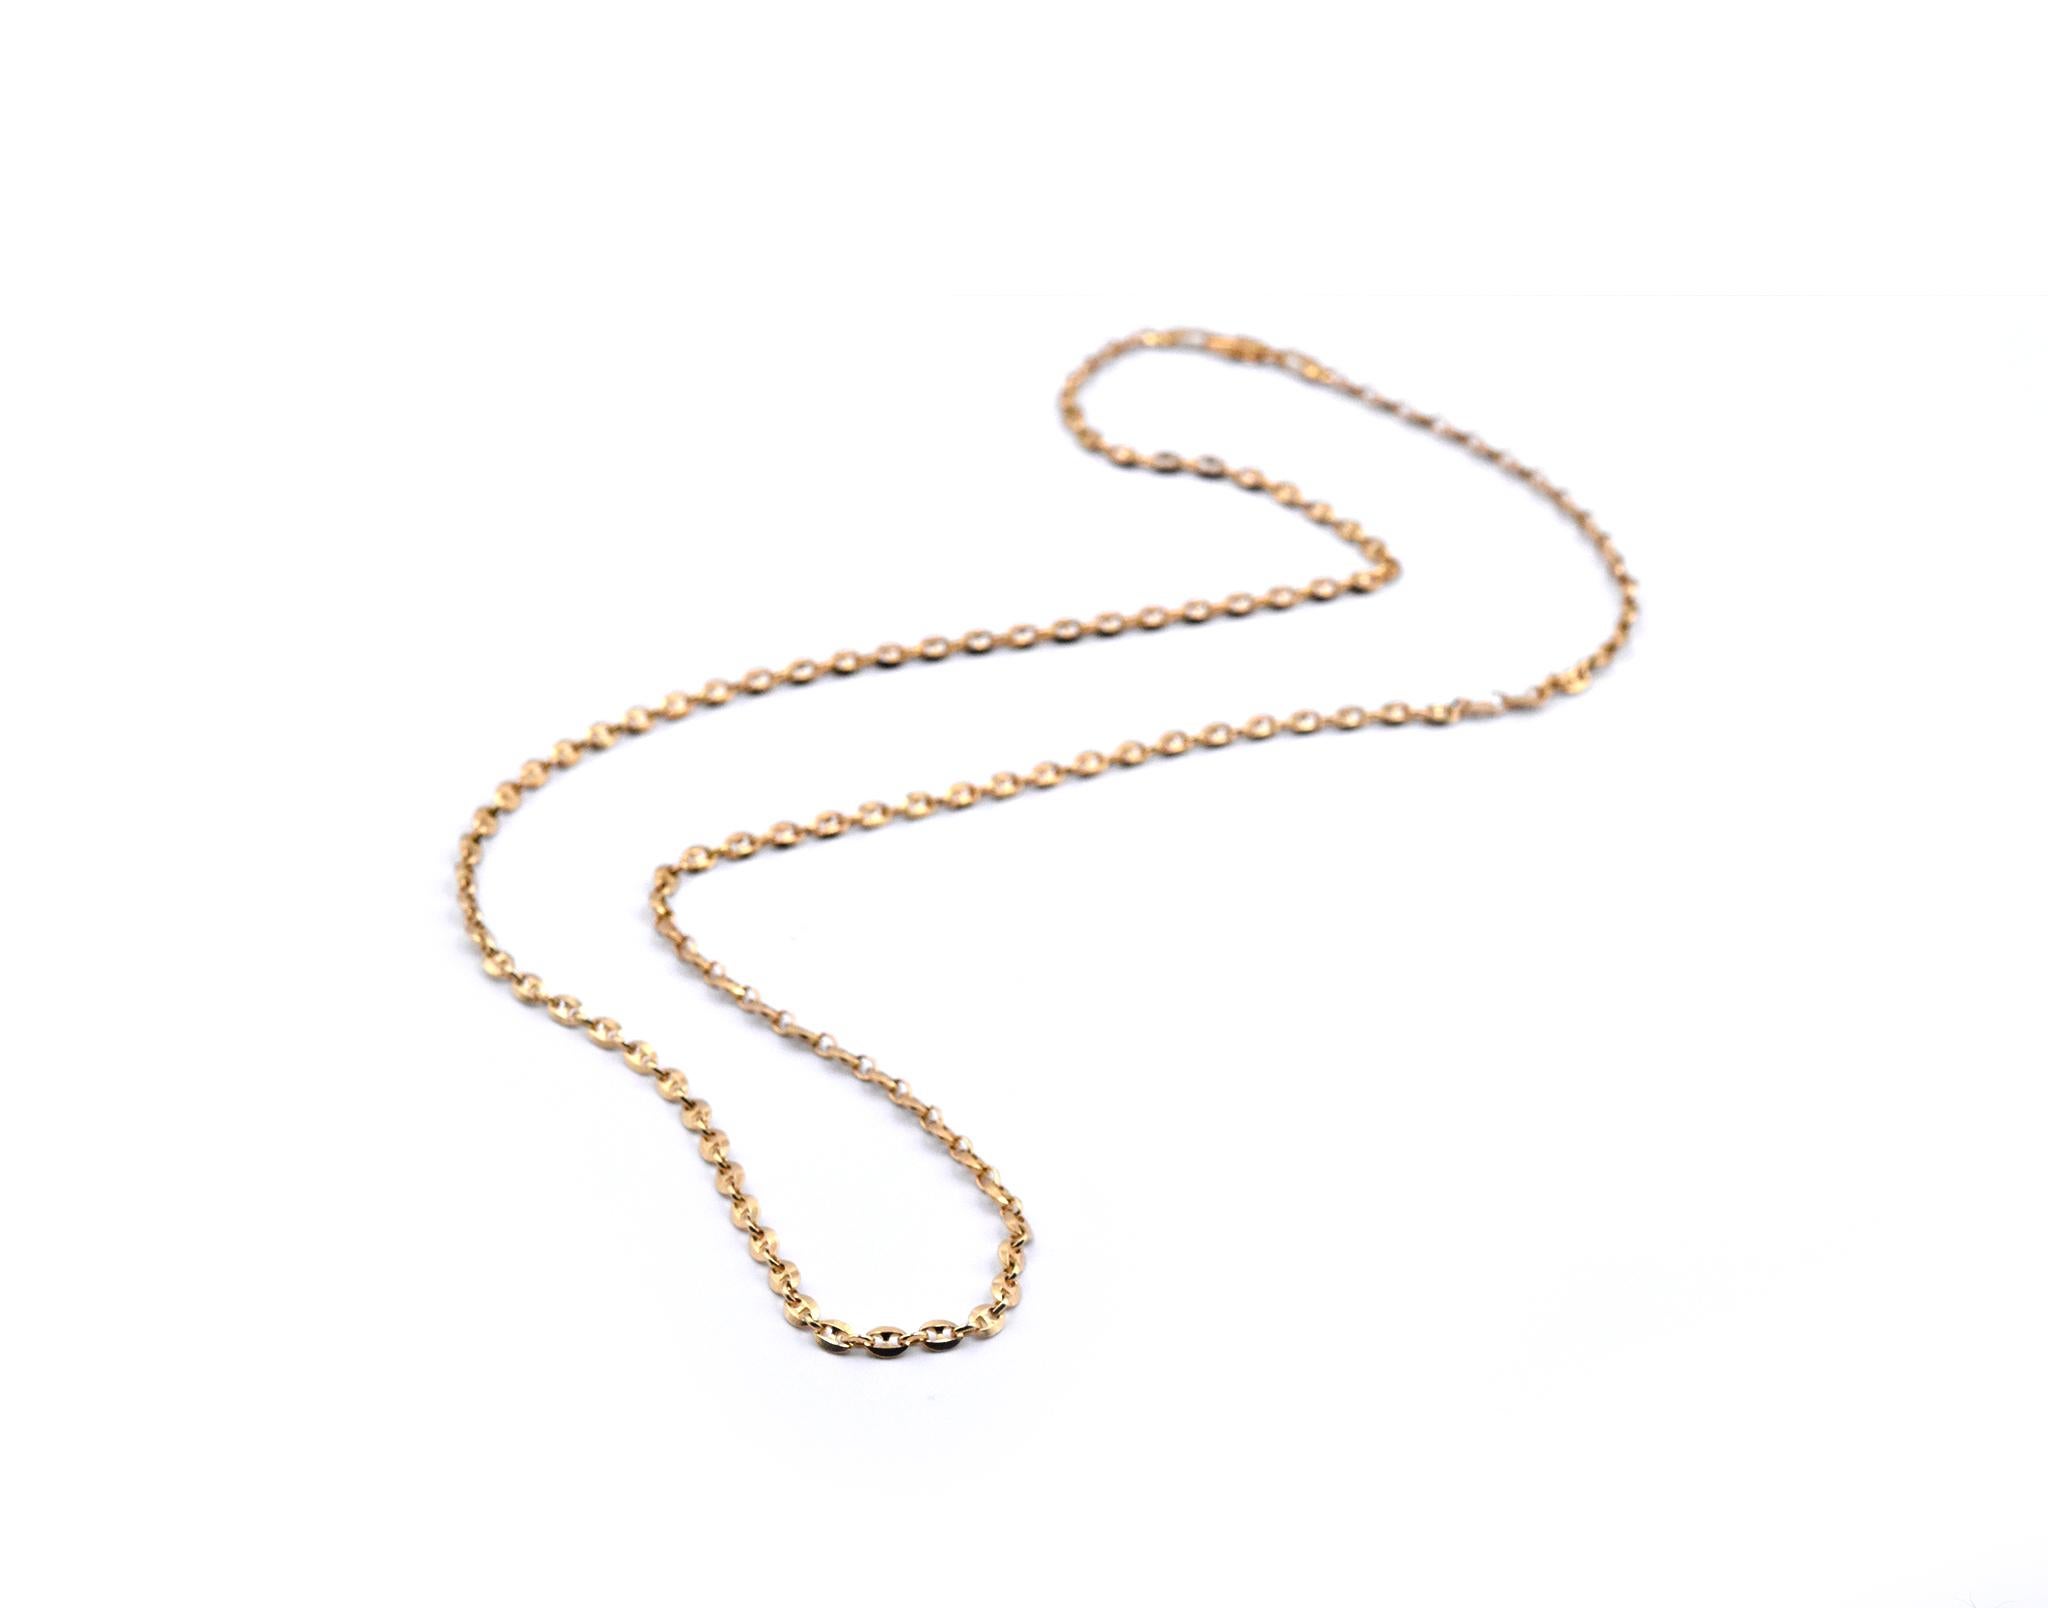 Designer: custom design
Material: 18k yellow gold
Dimensions: necklace measures 23 inches long and 2.95mm wide
Weight: 12.34 grams